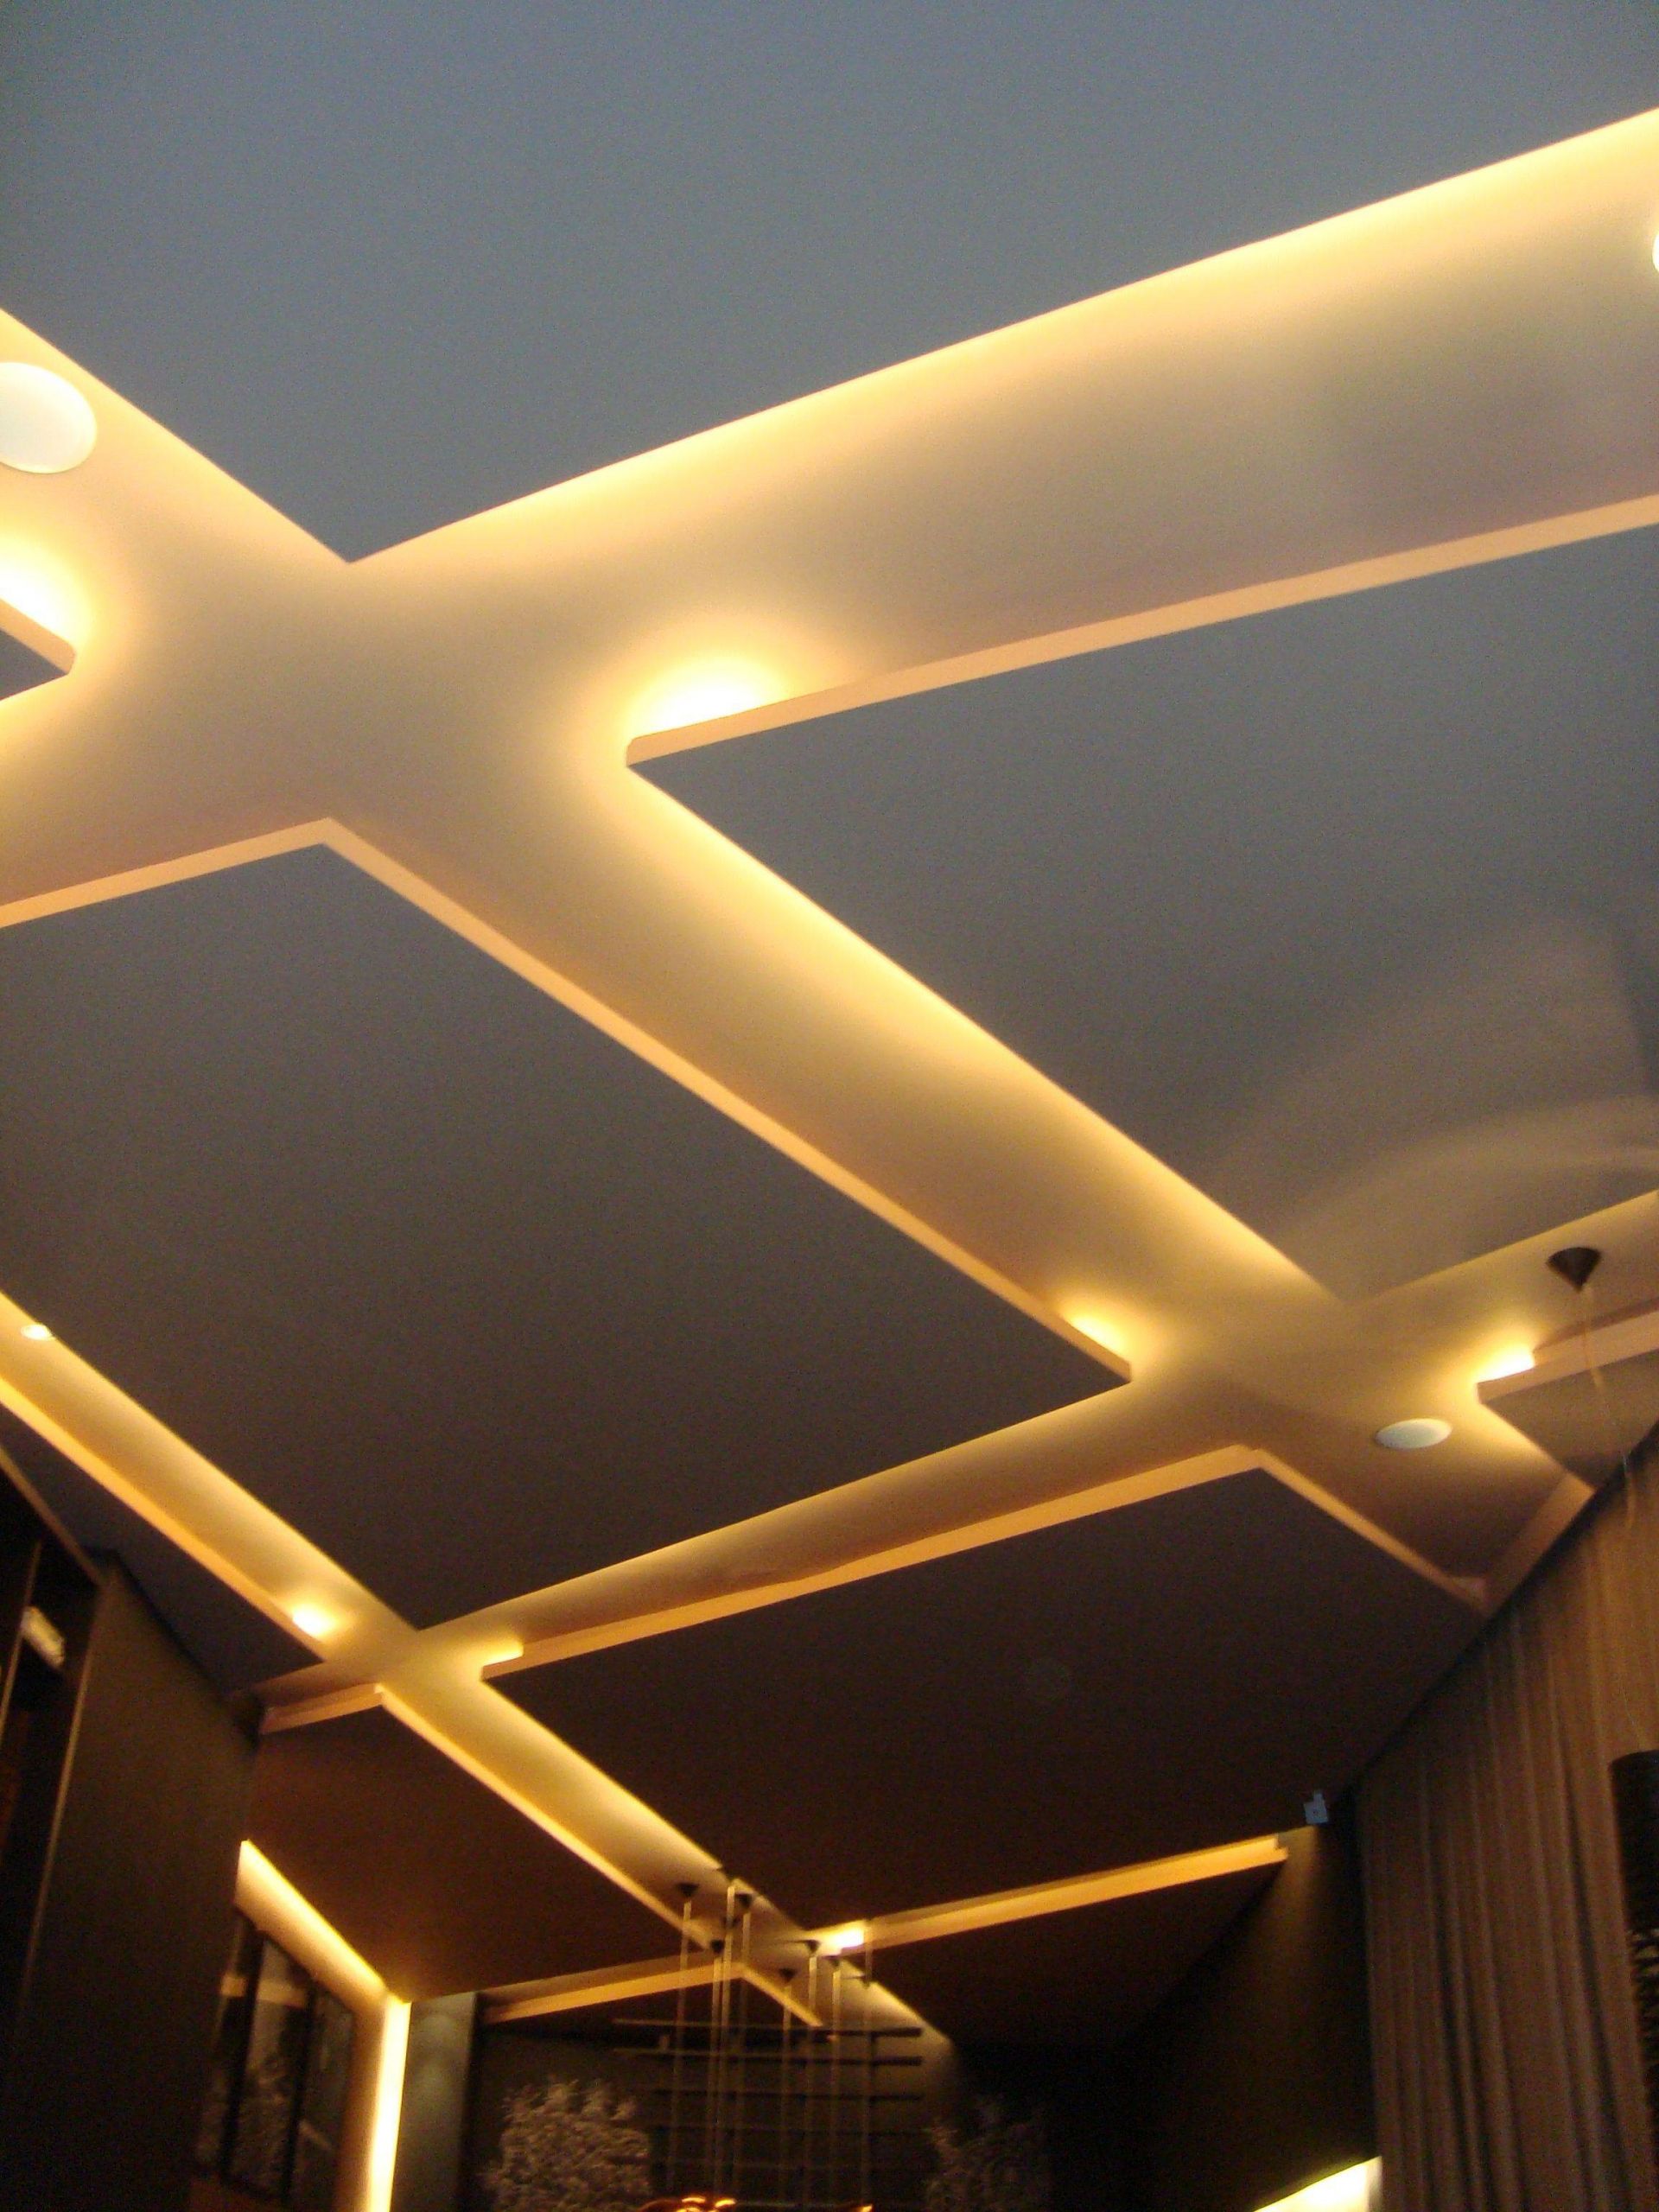 Incredible Fall Ceiling Designs for Living Room | Home Design